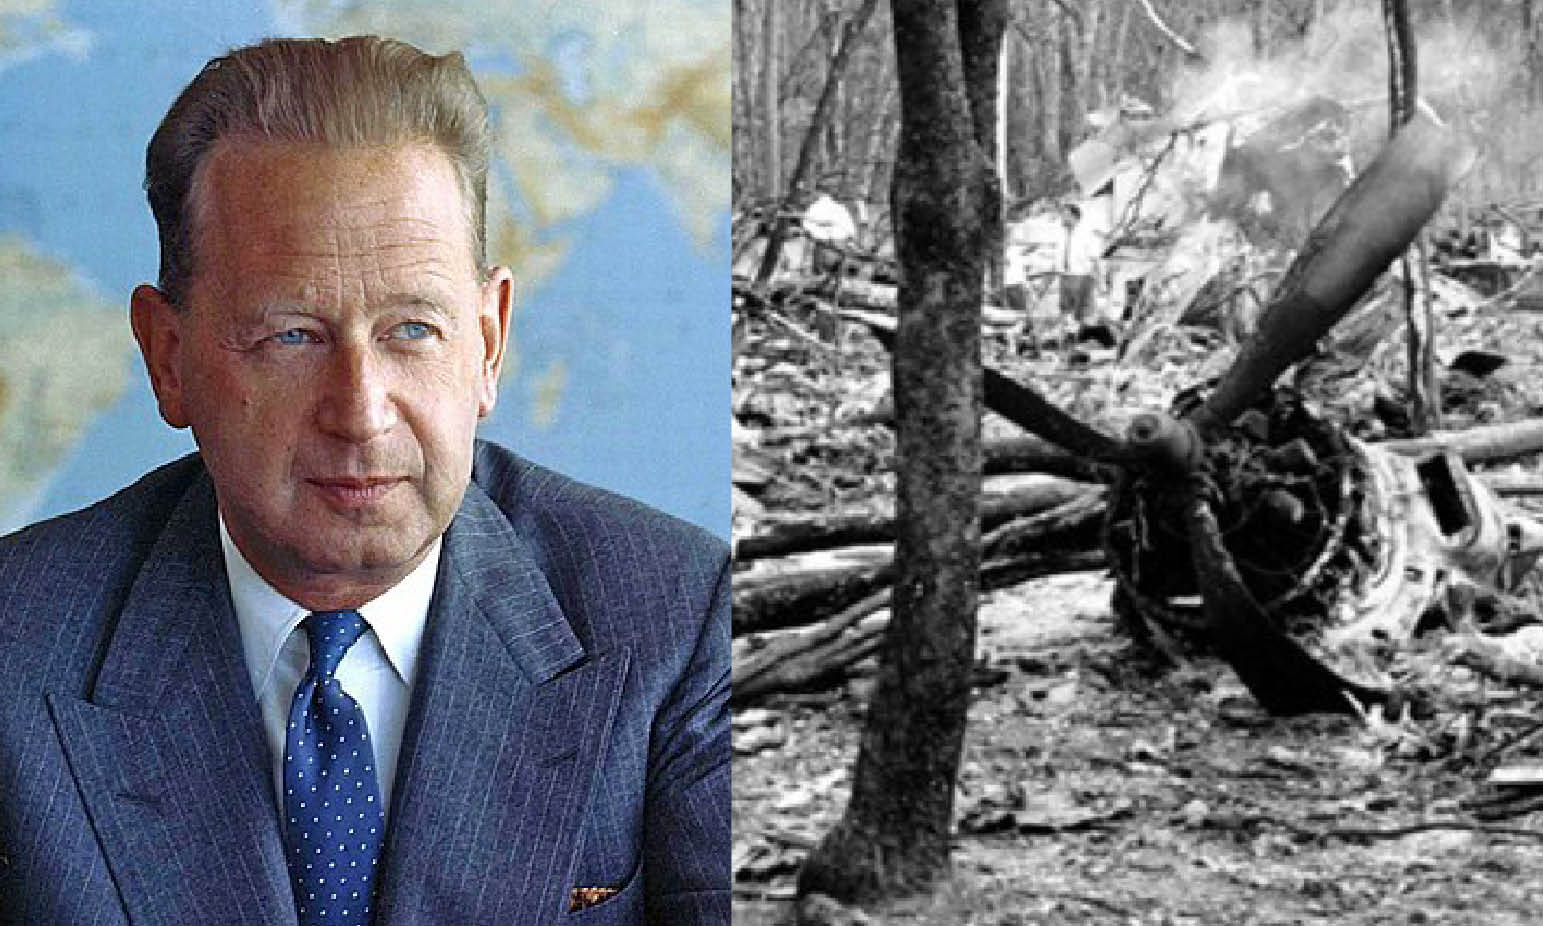 “THE UN SECRETARY GENERAL KILLED”: AFTER 58 YEARS THE BRITISH 007 CONCEAL THE DOSSIER